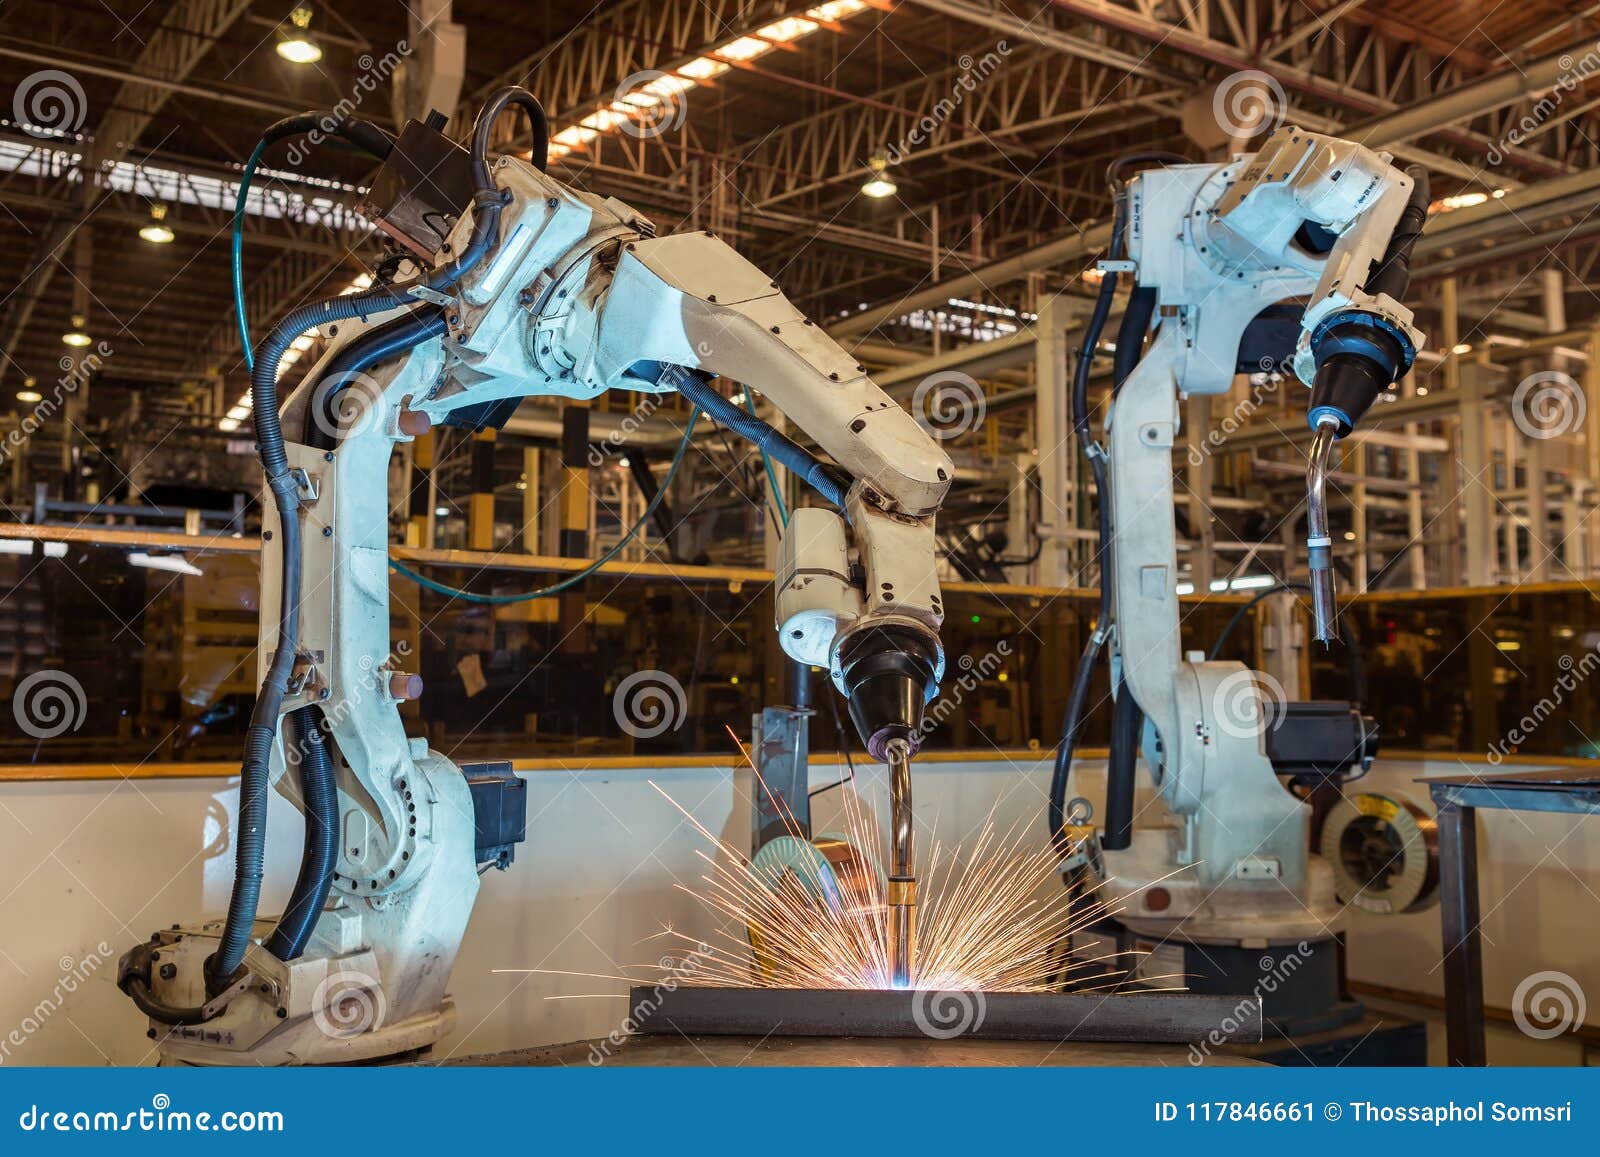 industrial robot is welding assembly automotive part in factory